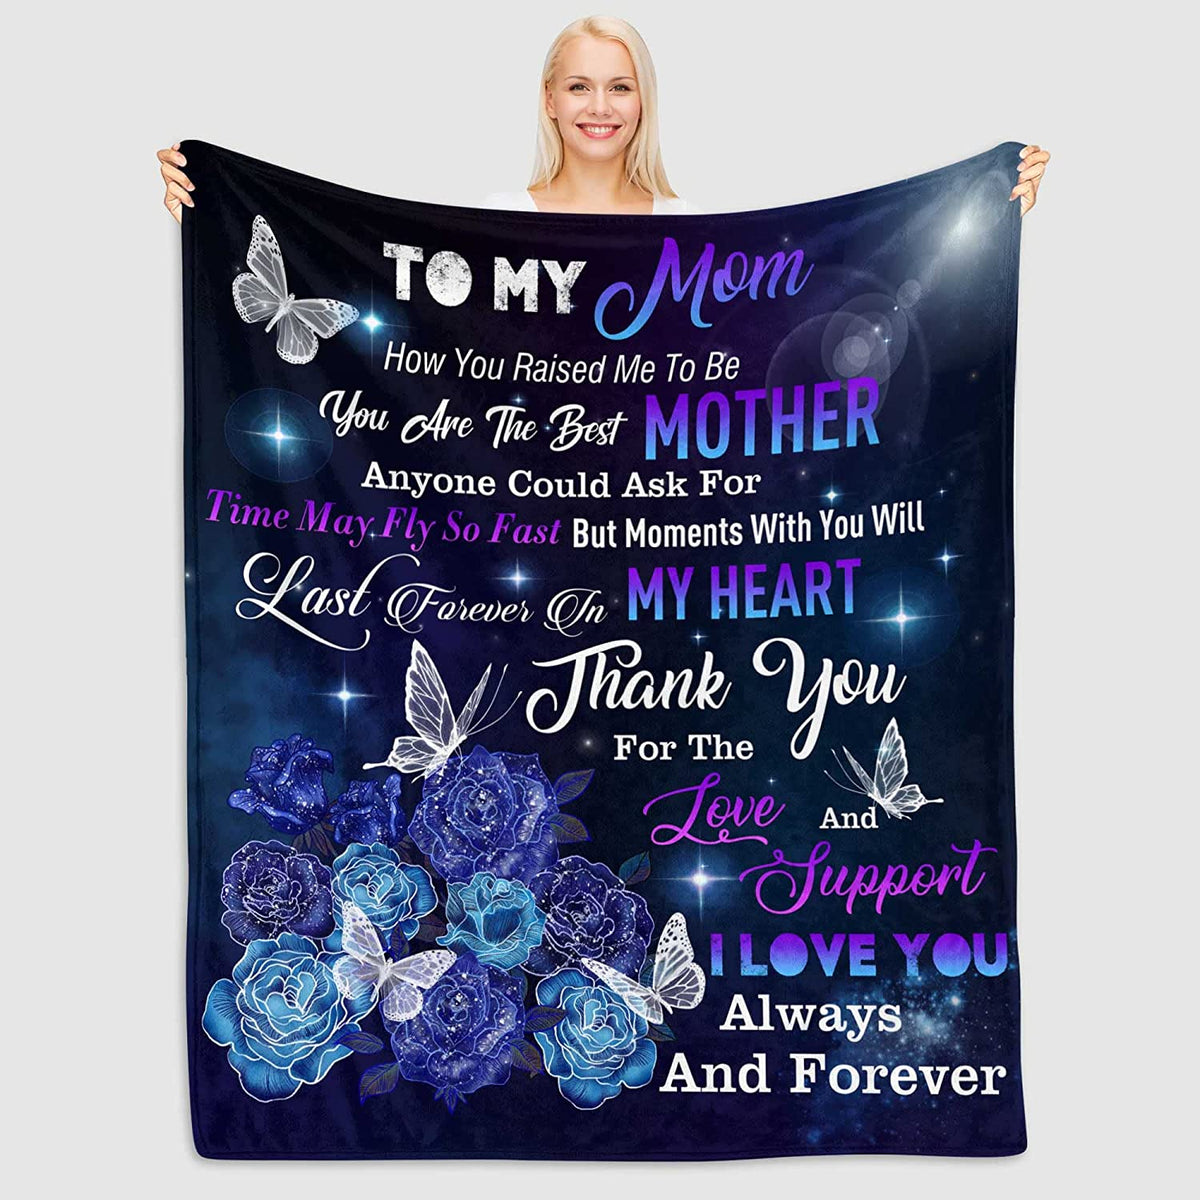 To My Mom Blanket, Gifts for Mom, Birthday Gifts Mother Blankets from Daughter Son Christmas Mother's Day Soft Fleece Blanket